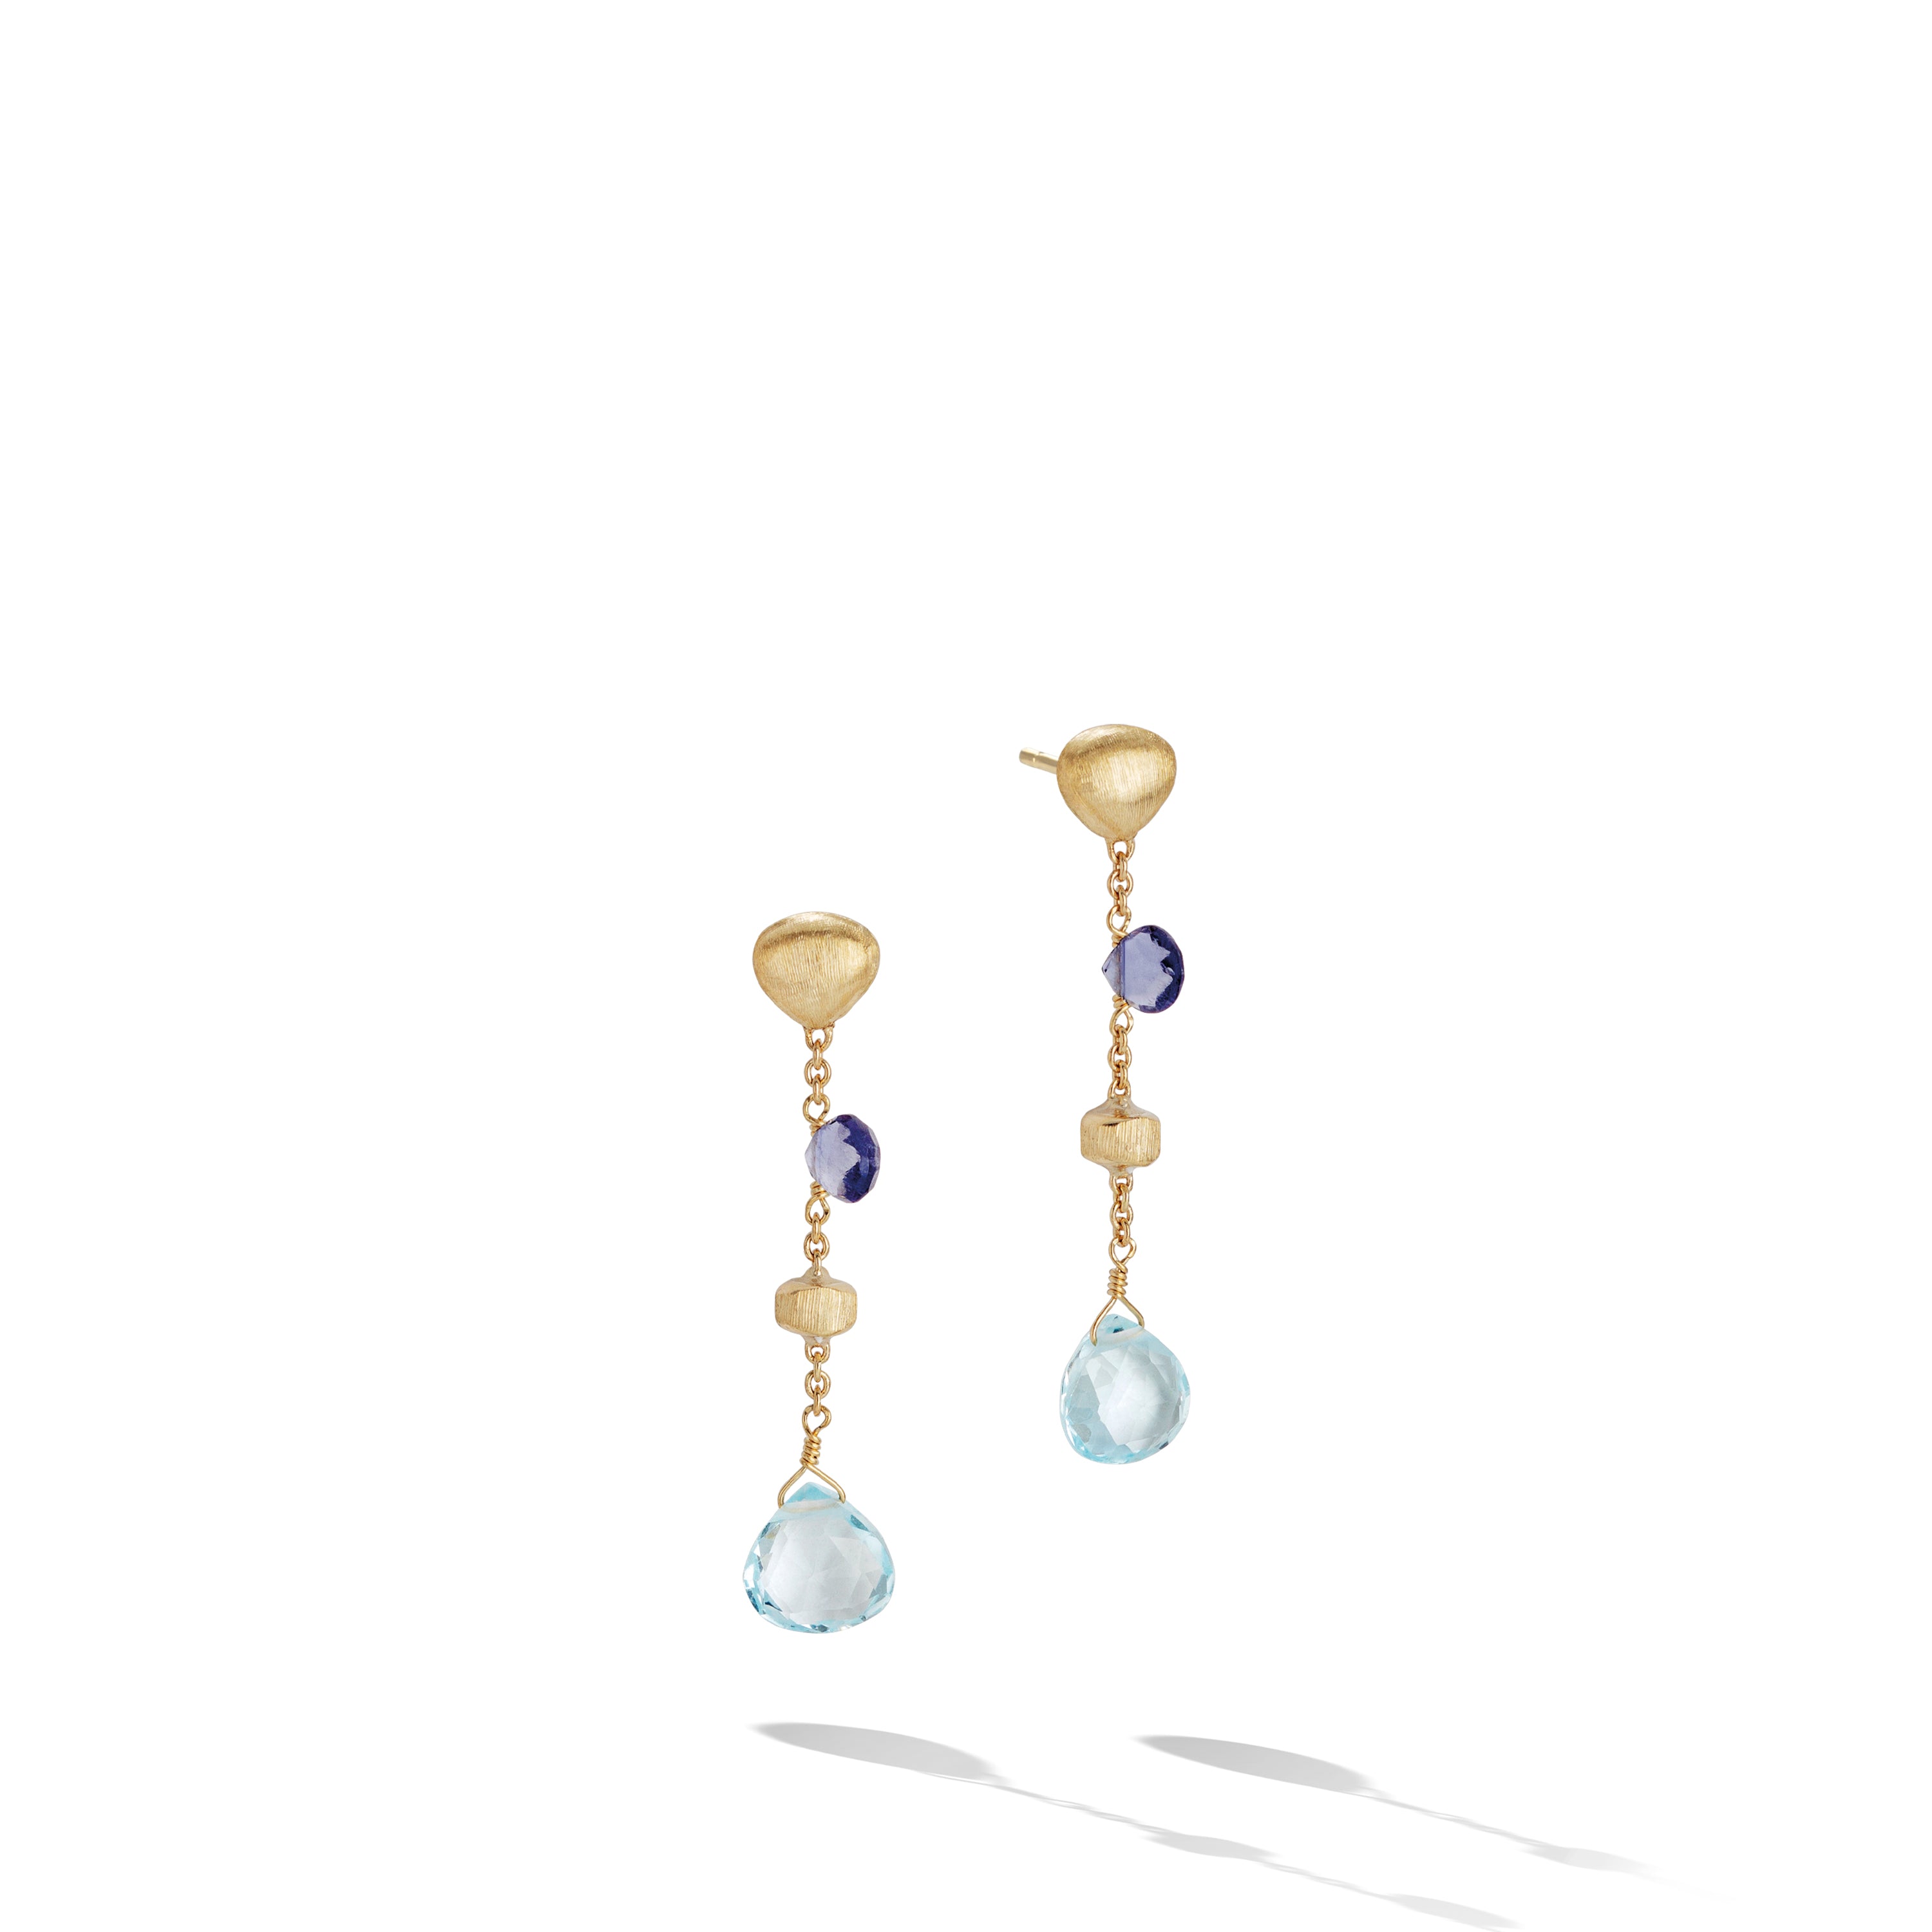 Marco Bicego Paradise Collection 18K Yellow Gold Iolite and Blue Topaz Short Drop Earrings